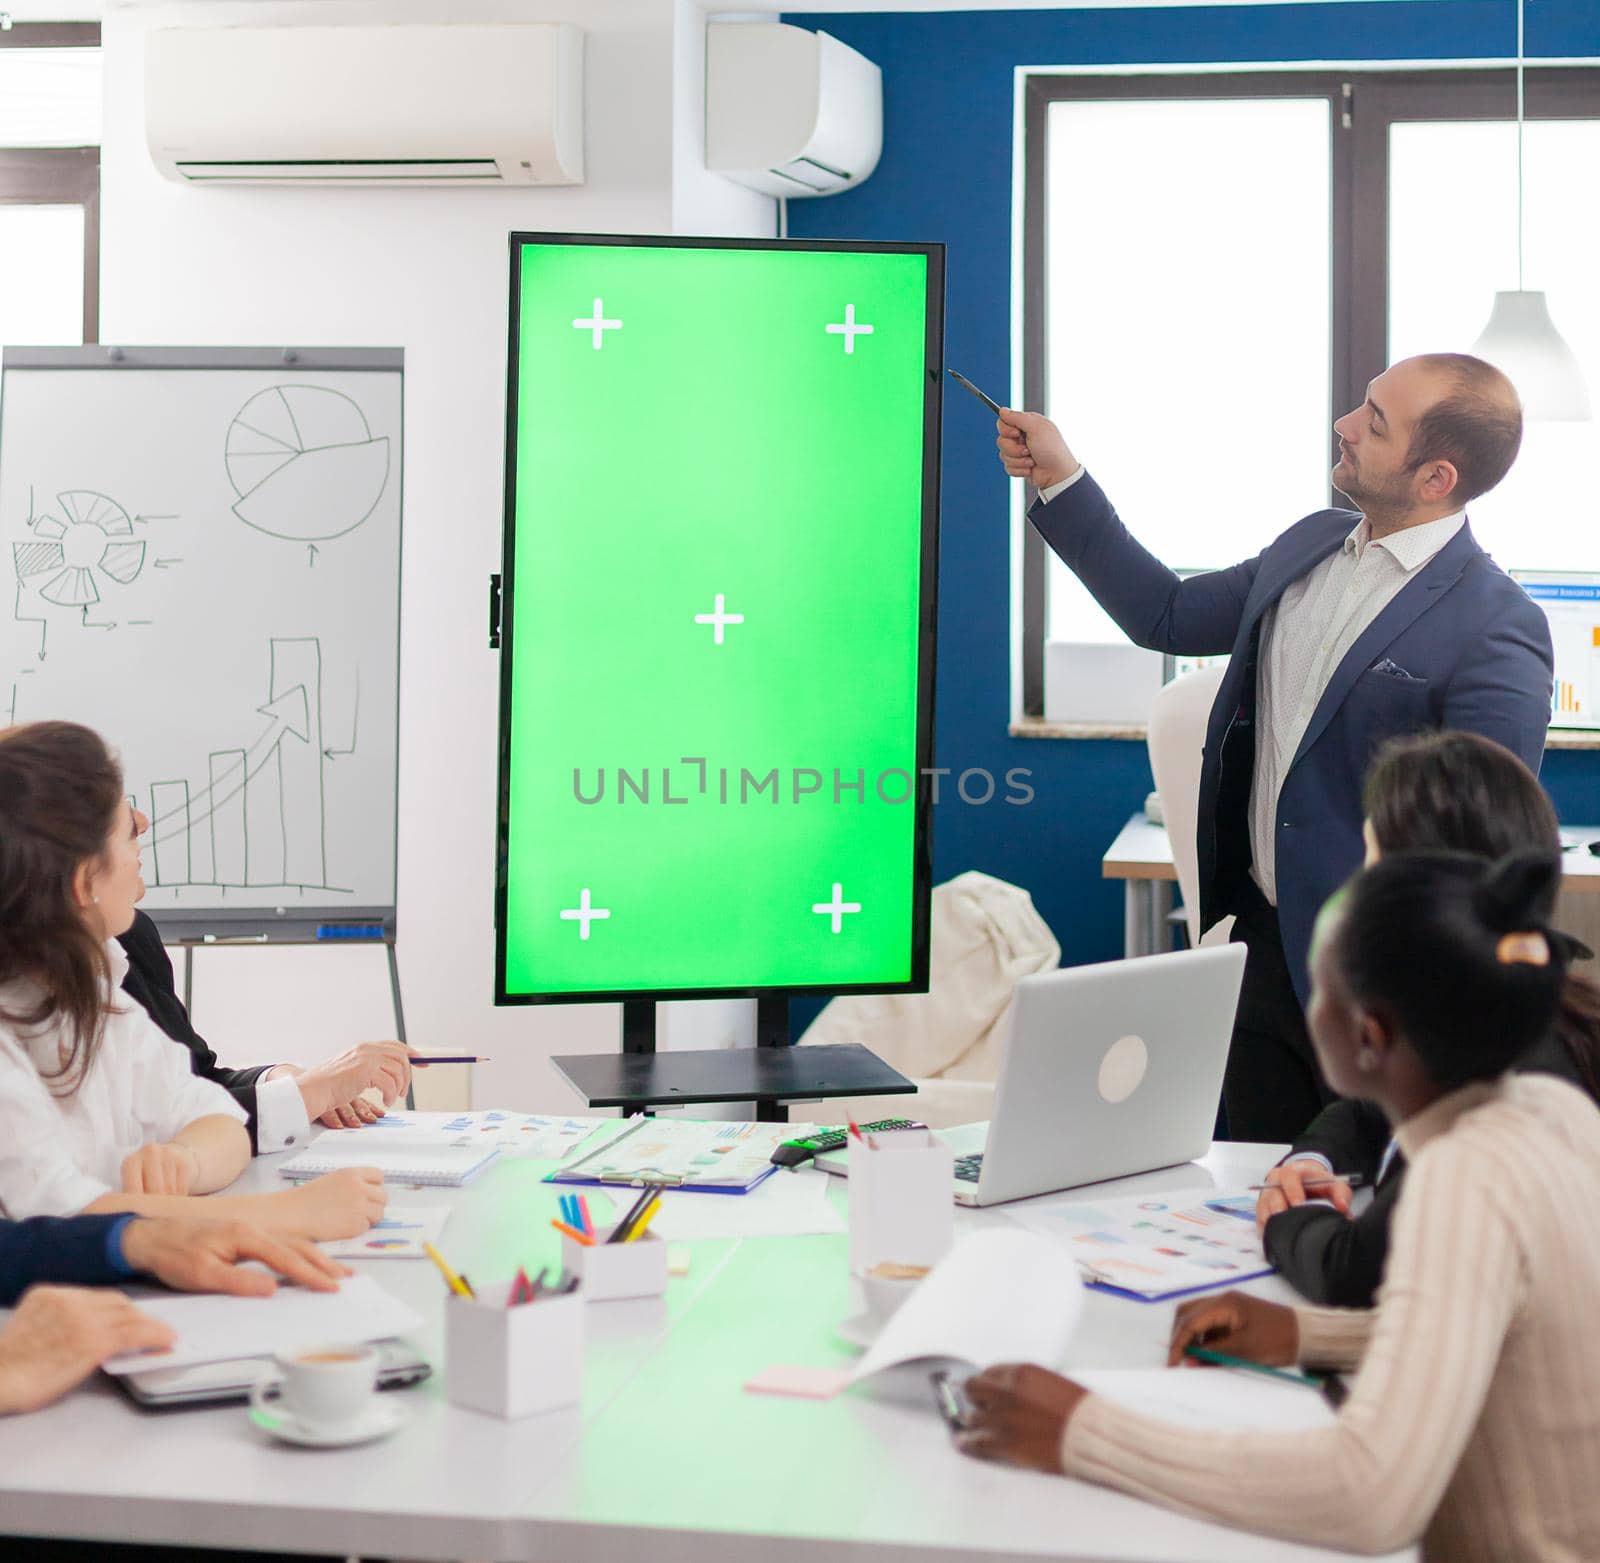 Leader of company presenting financial plan using mockup display in front of diverse team brainstorming. Manager explainig project strategy on green screen monitor with chroma key desktop in boardroom